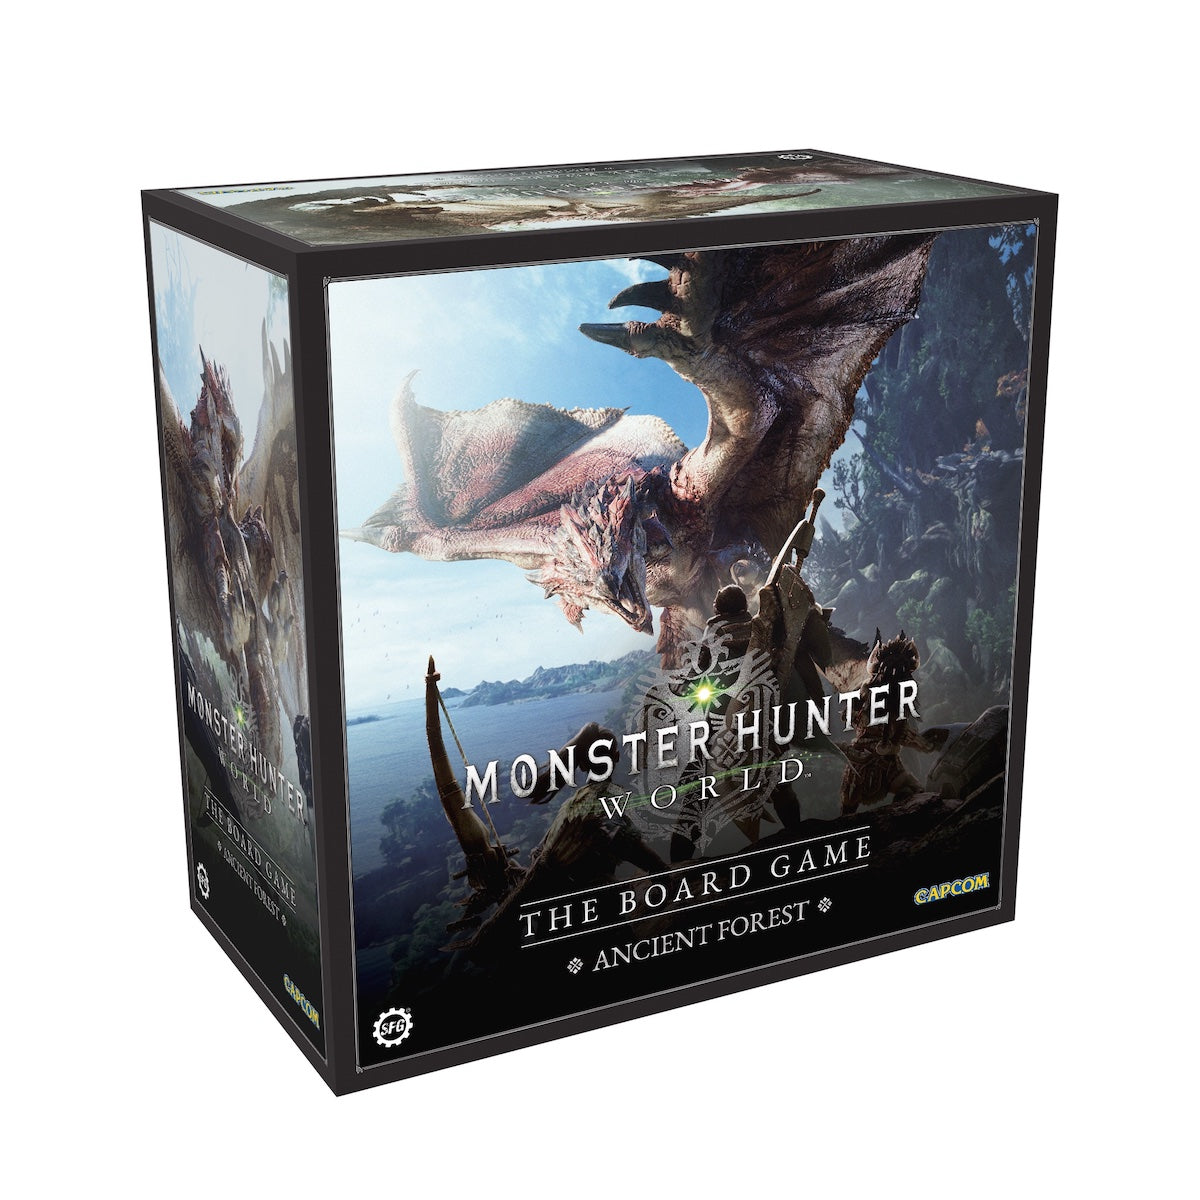 Monster Hunter World: The Board Game - Ancient Forest Core Game is a cooperative arena combat board game for 1-4 players.

Members of the Fifth Fleet, prepare for the ultimate tabletop monster hunting experience. In a world teeming with massive monsters, every battle is a boss battle!

In this cooperative arena combat board game for 1-4 players set in an open world, it’s not you who dictates the flow of battle, but the monster you hunt - and each one is wildly different.

Tasked with protecting the Astera b